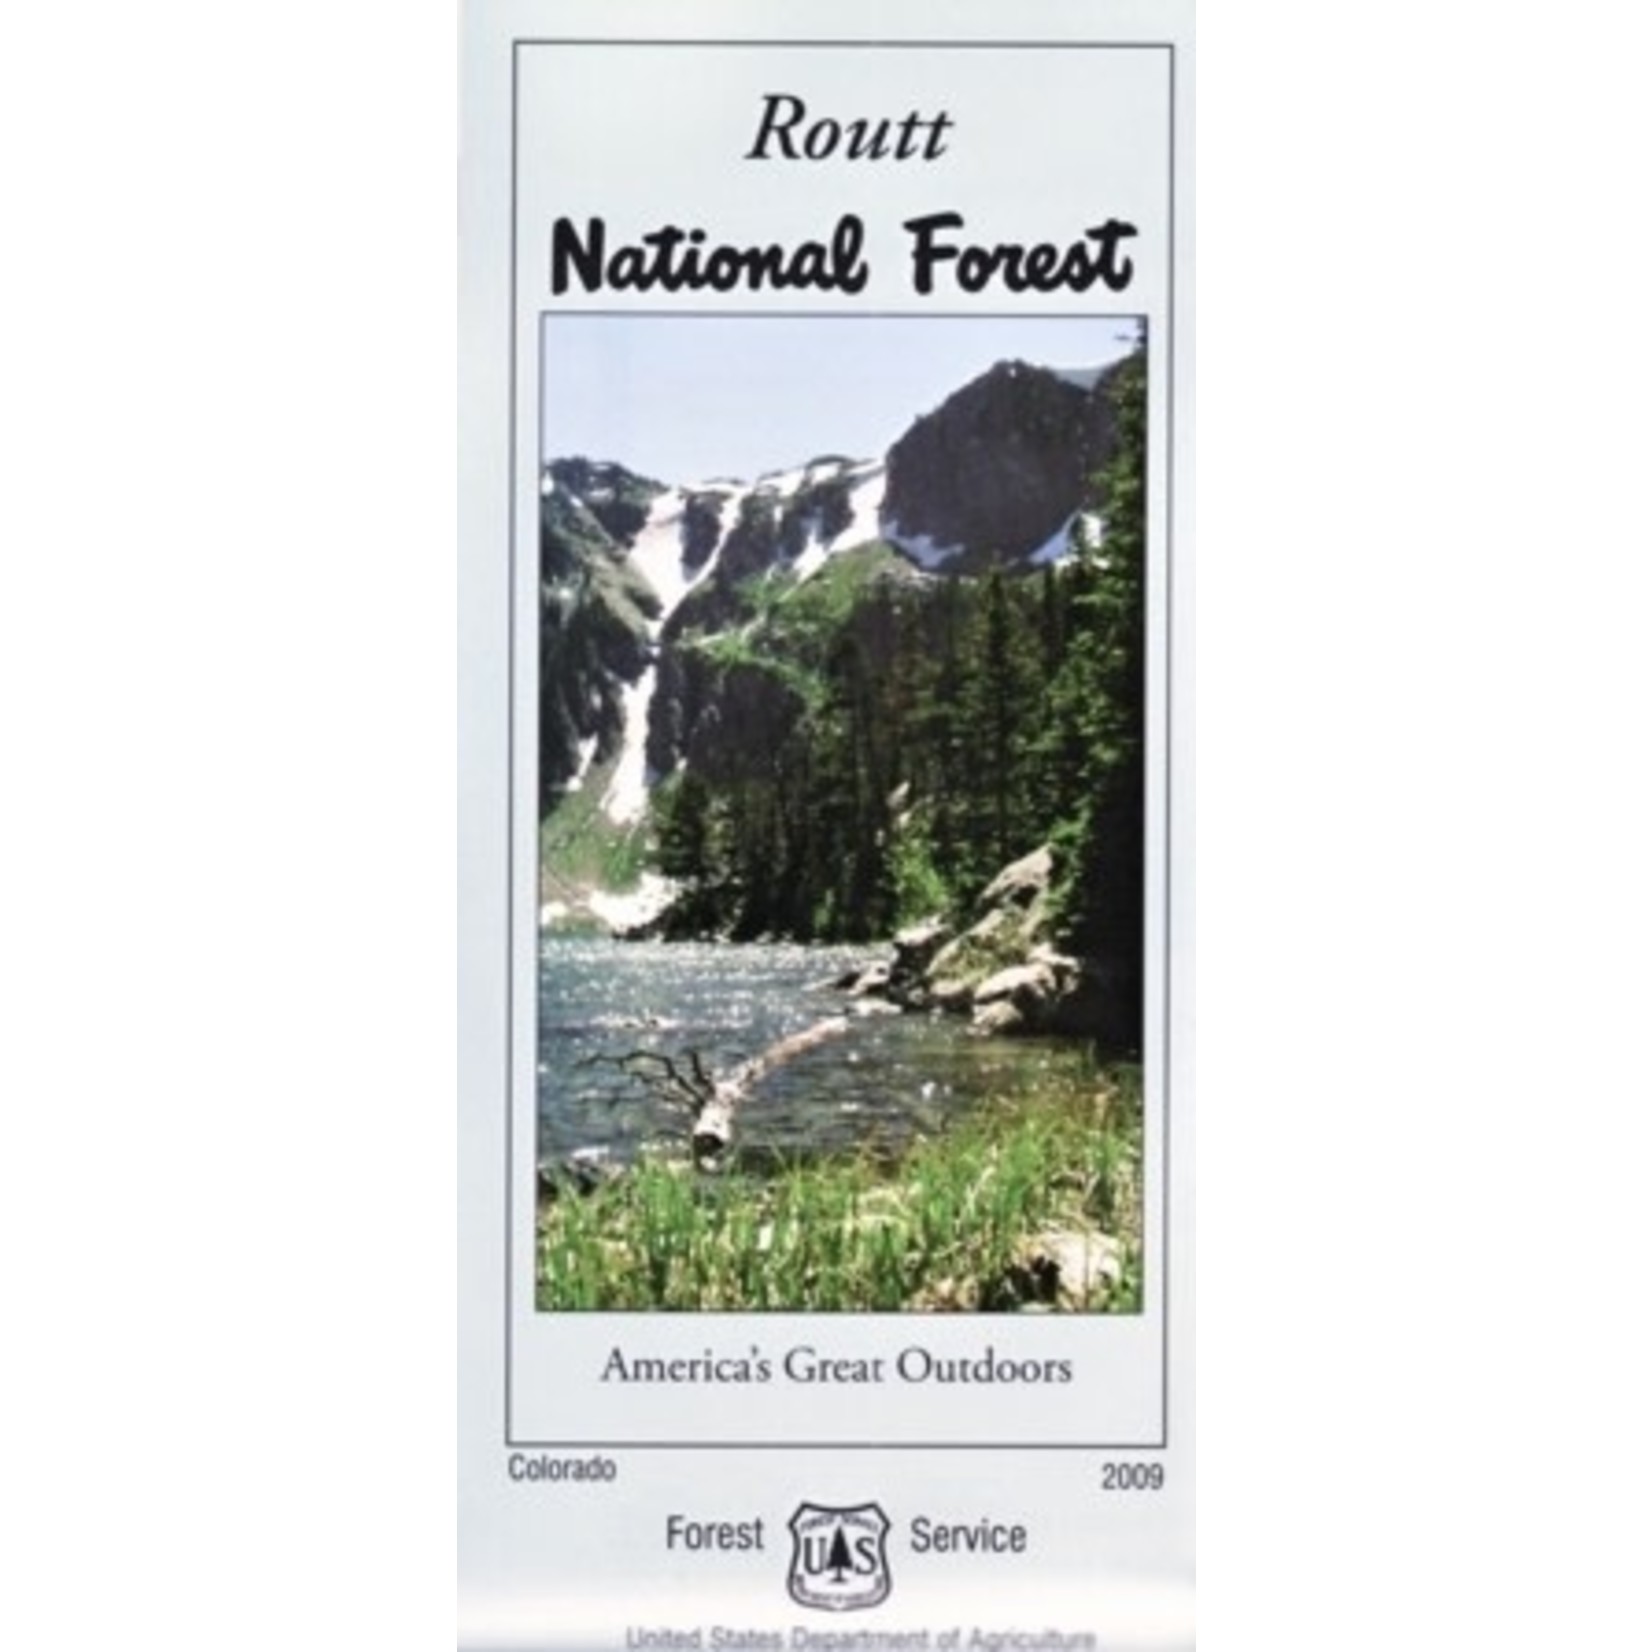 U.S. Forest Service Routt National Forest Map, Colorado 2009